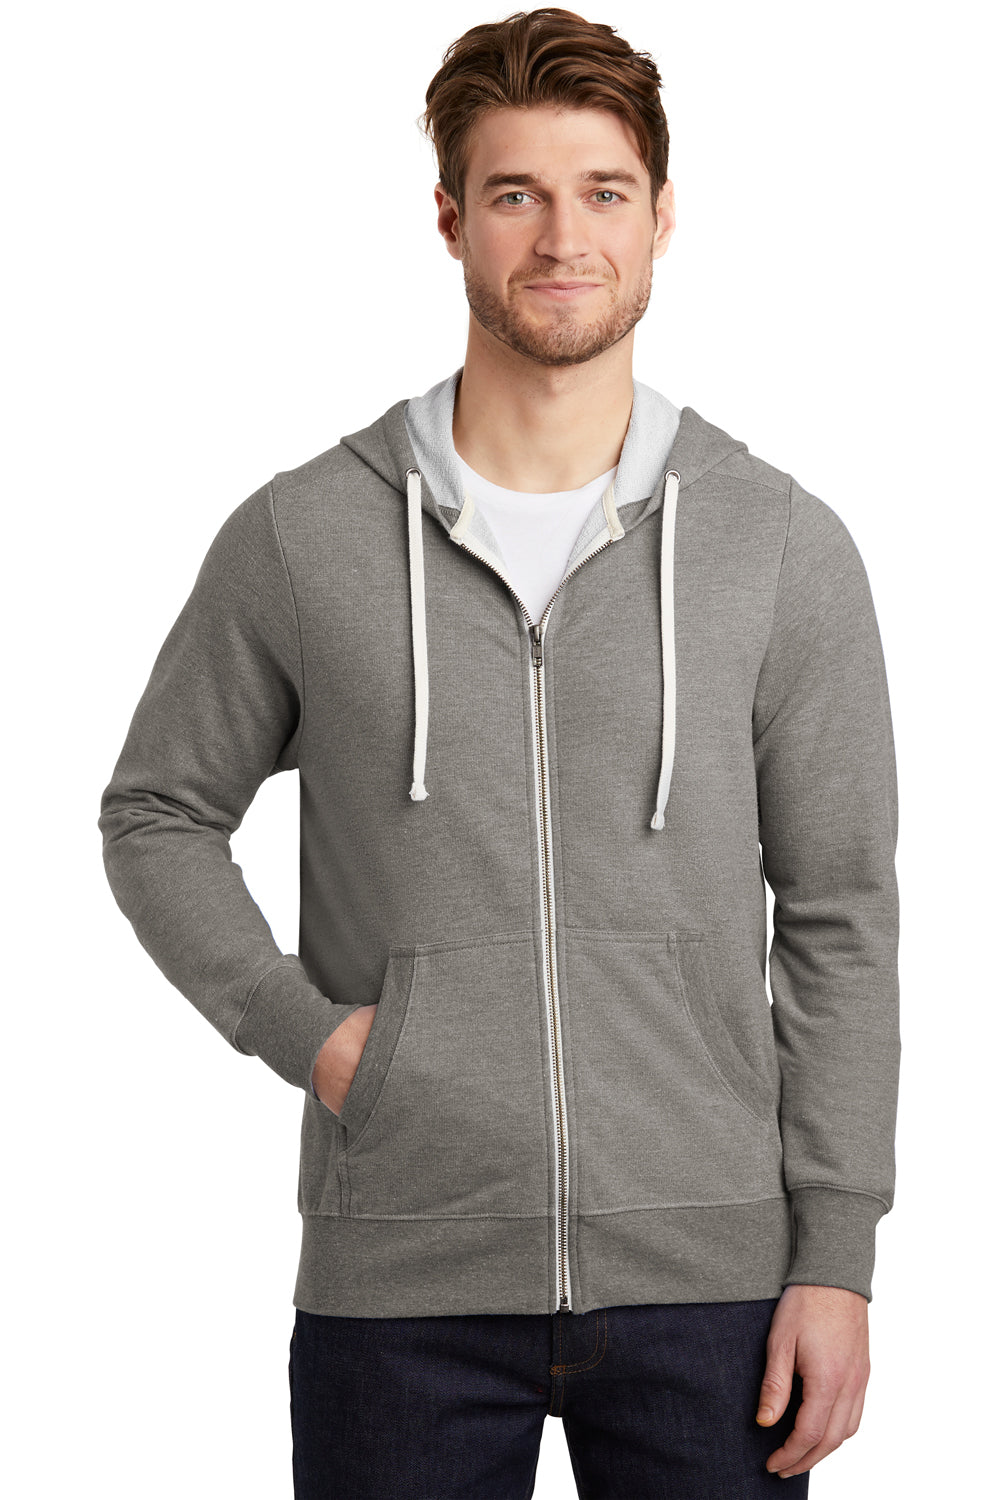 District DT356 Mens Perfect French Terry Full Zip Hooded Sweatshirt Hoodie Grey Front